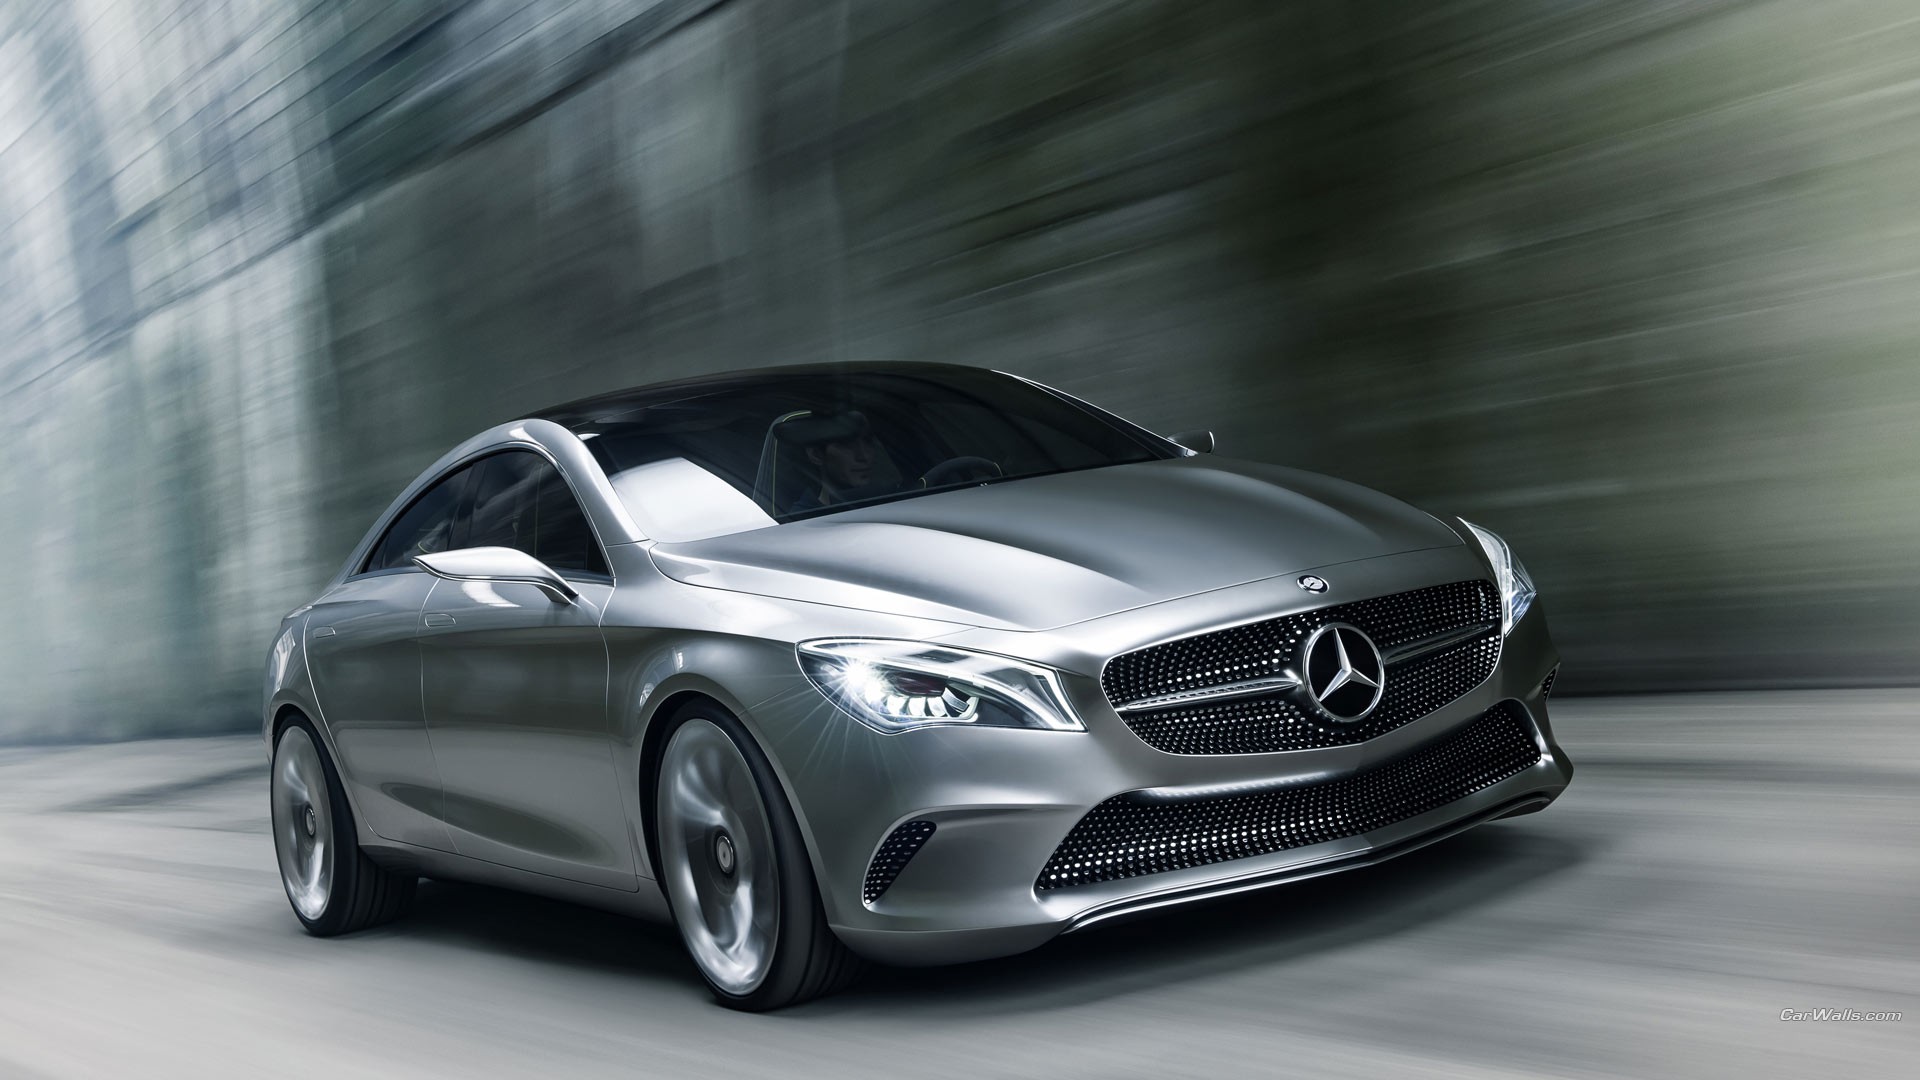 cars, Style, Coupe, Mercedes, Benz, Mercedes, Style, Coupe Wallpaper